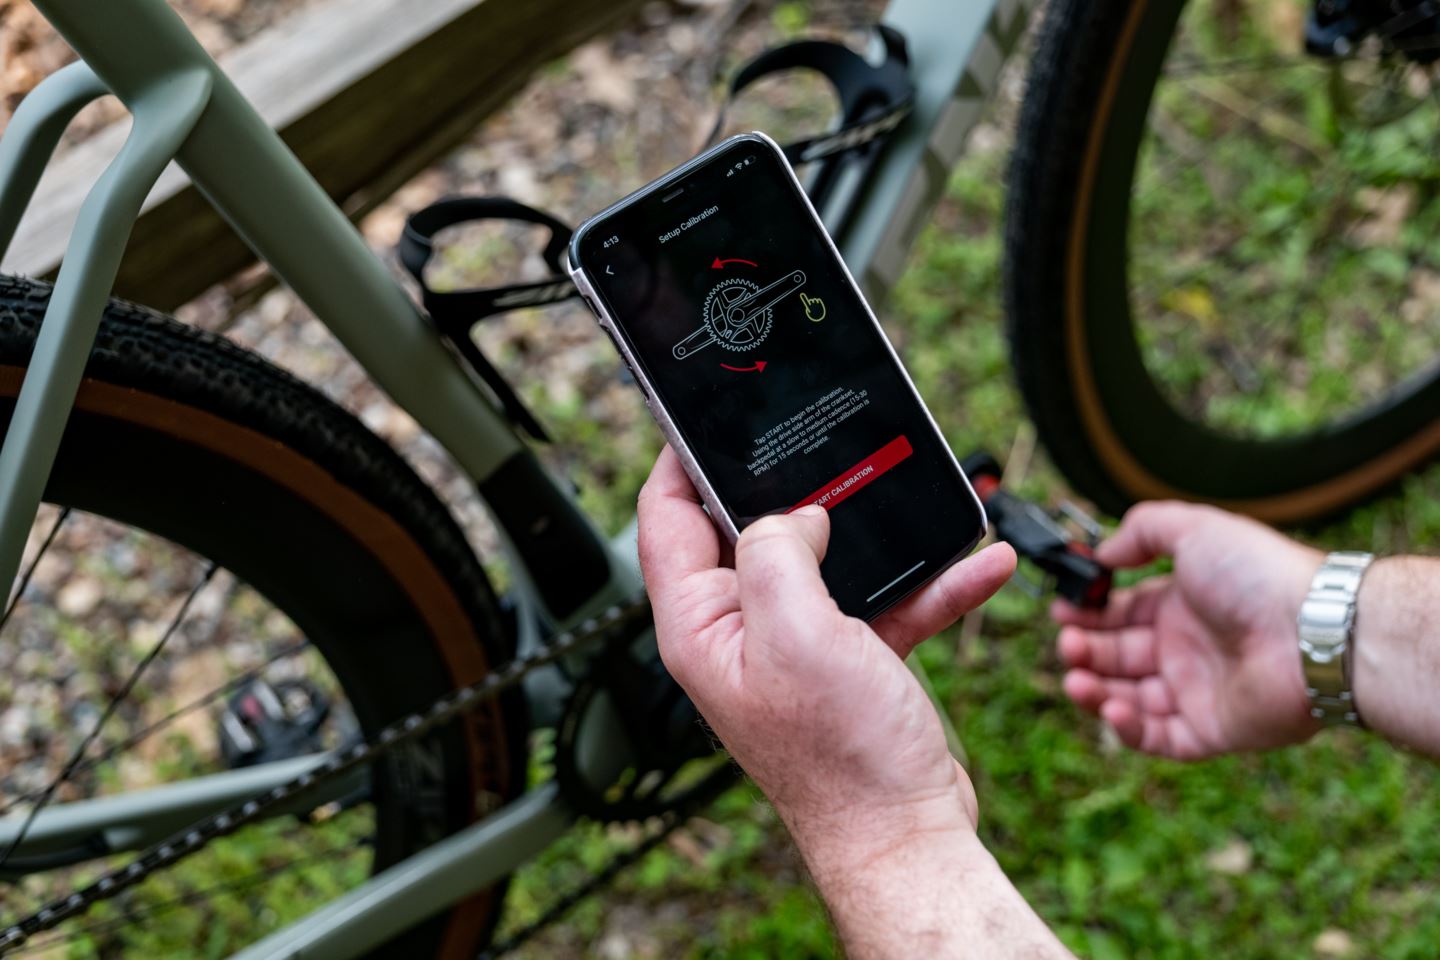 Open the AXS App to complete setting up your Apex AXS power meter.